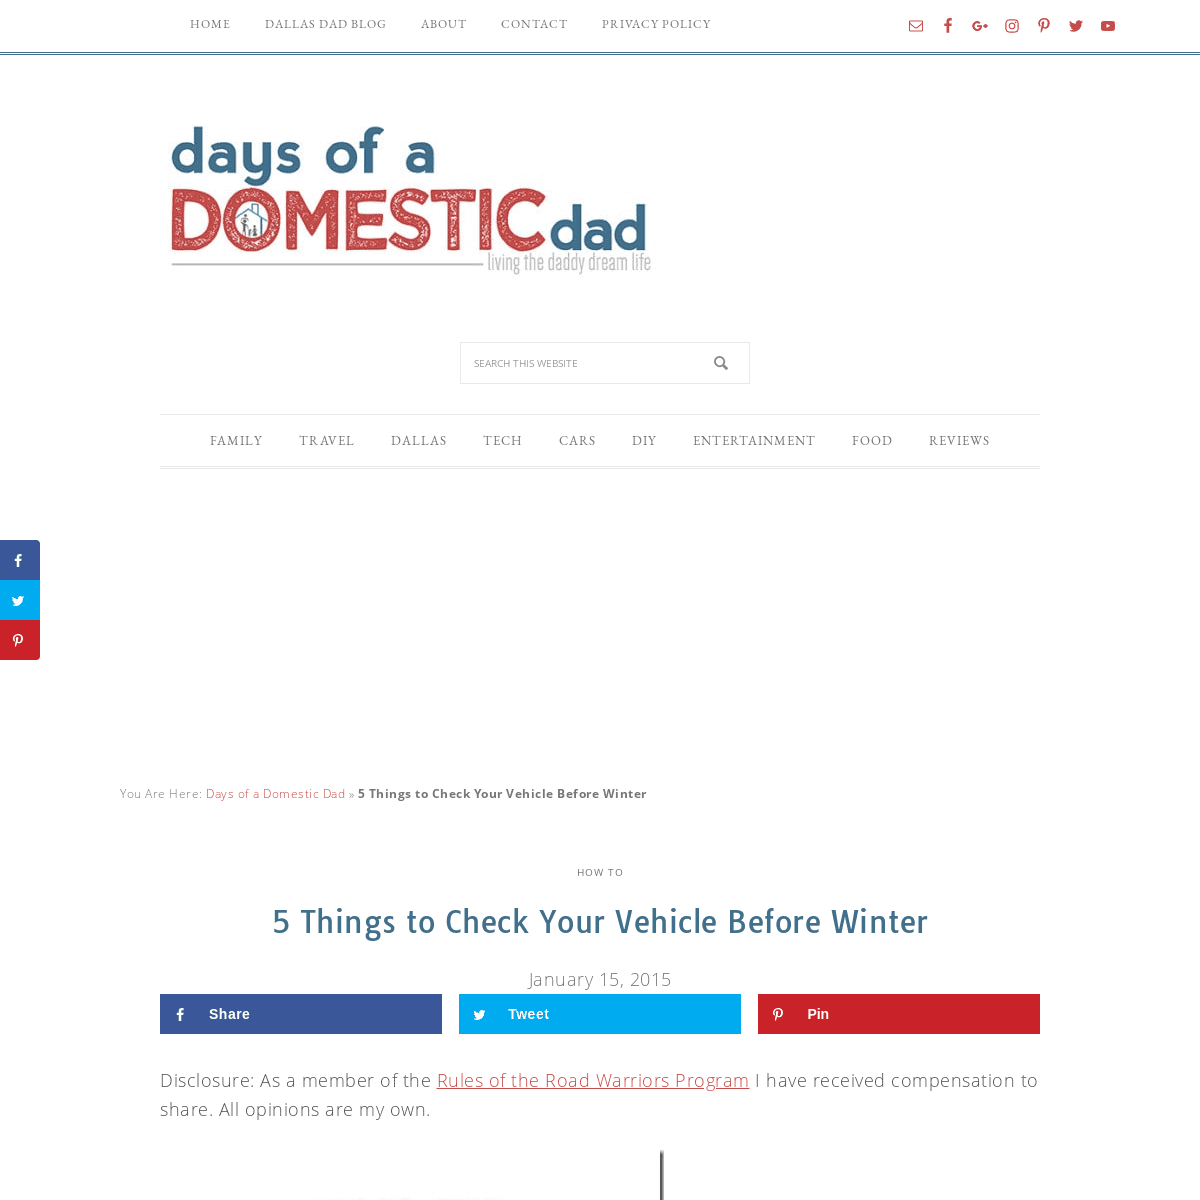 A complete backup of https://daysofadomesticdad.com/5-things-to-check-your-vehicle-before-winter/